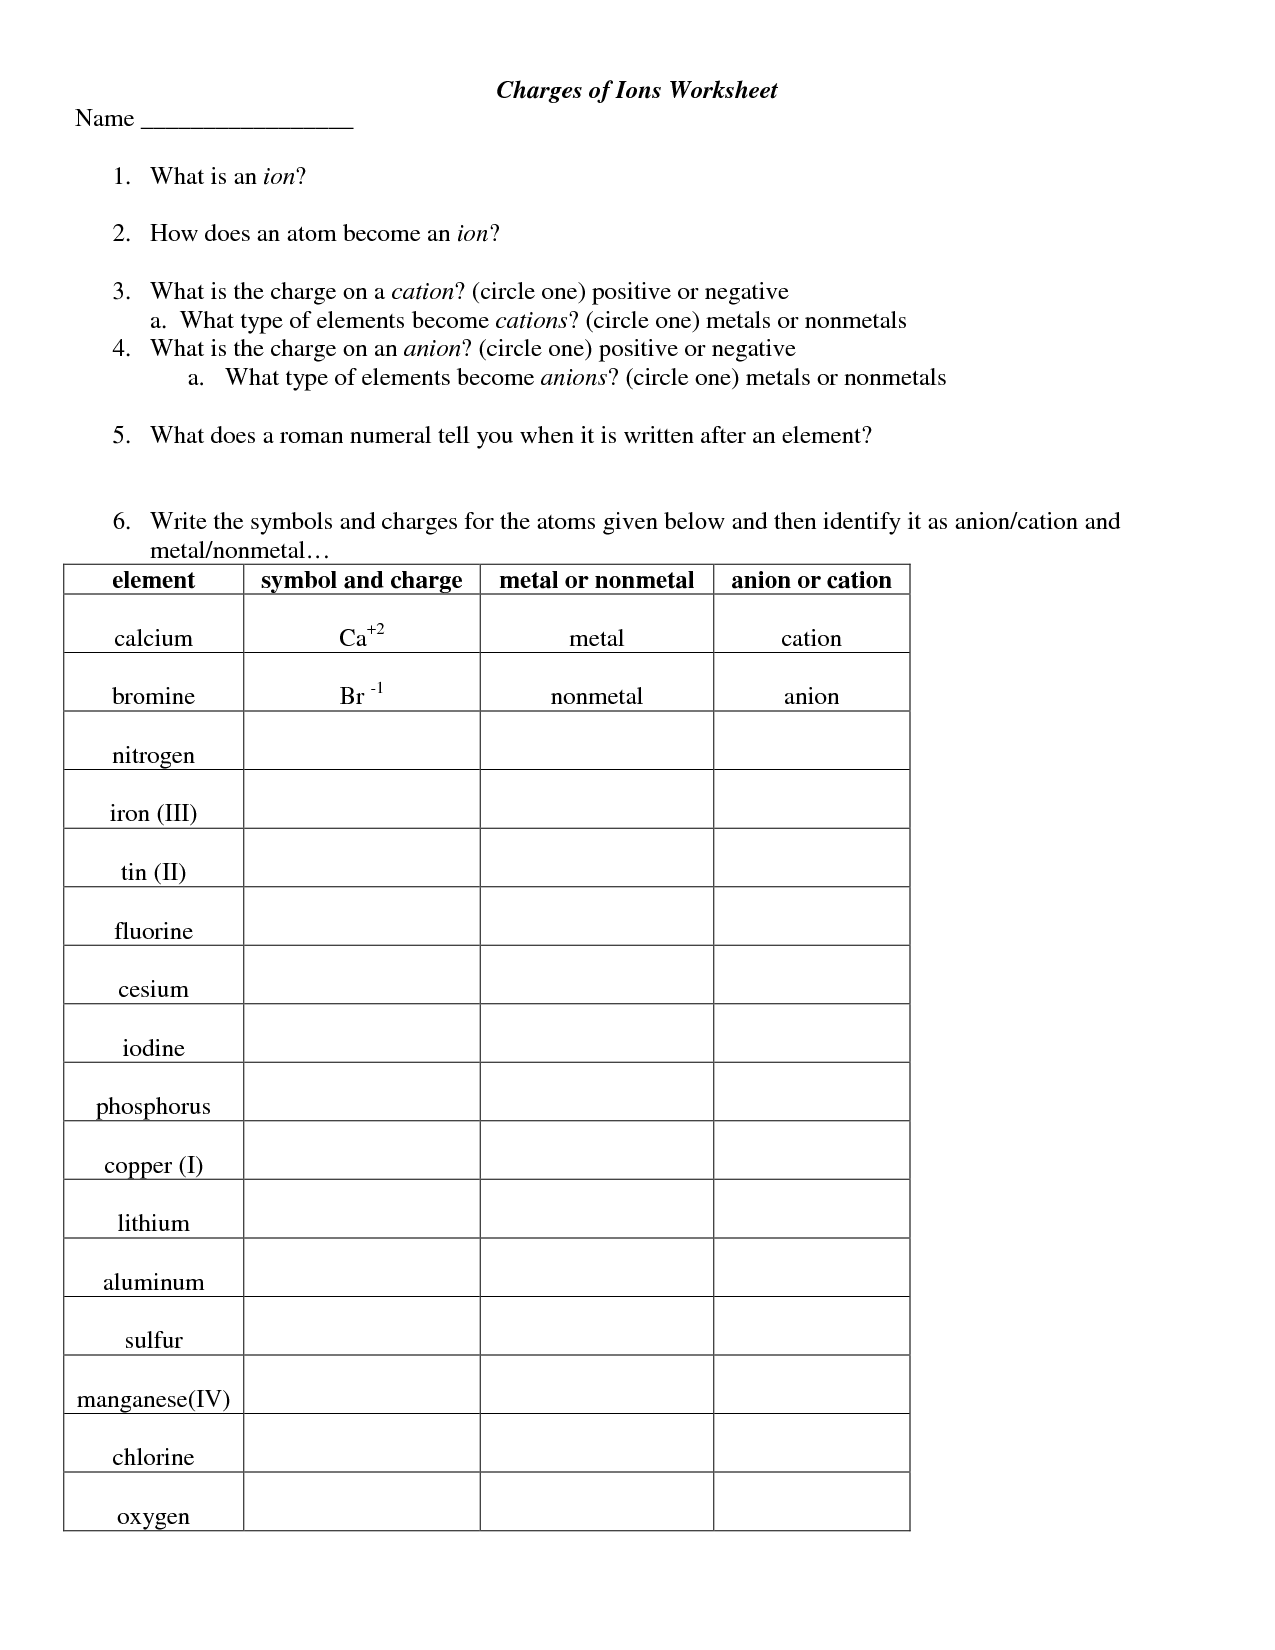 Charges of Ions Worksheet Answers Image